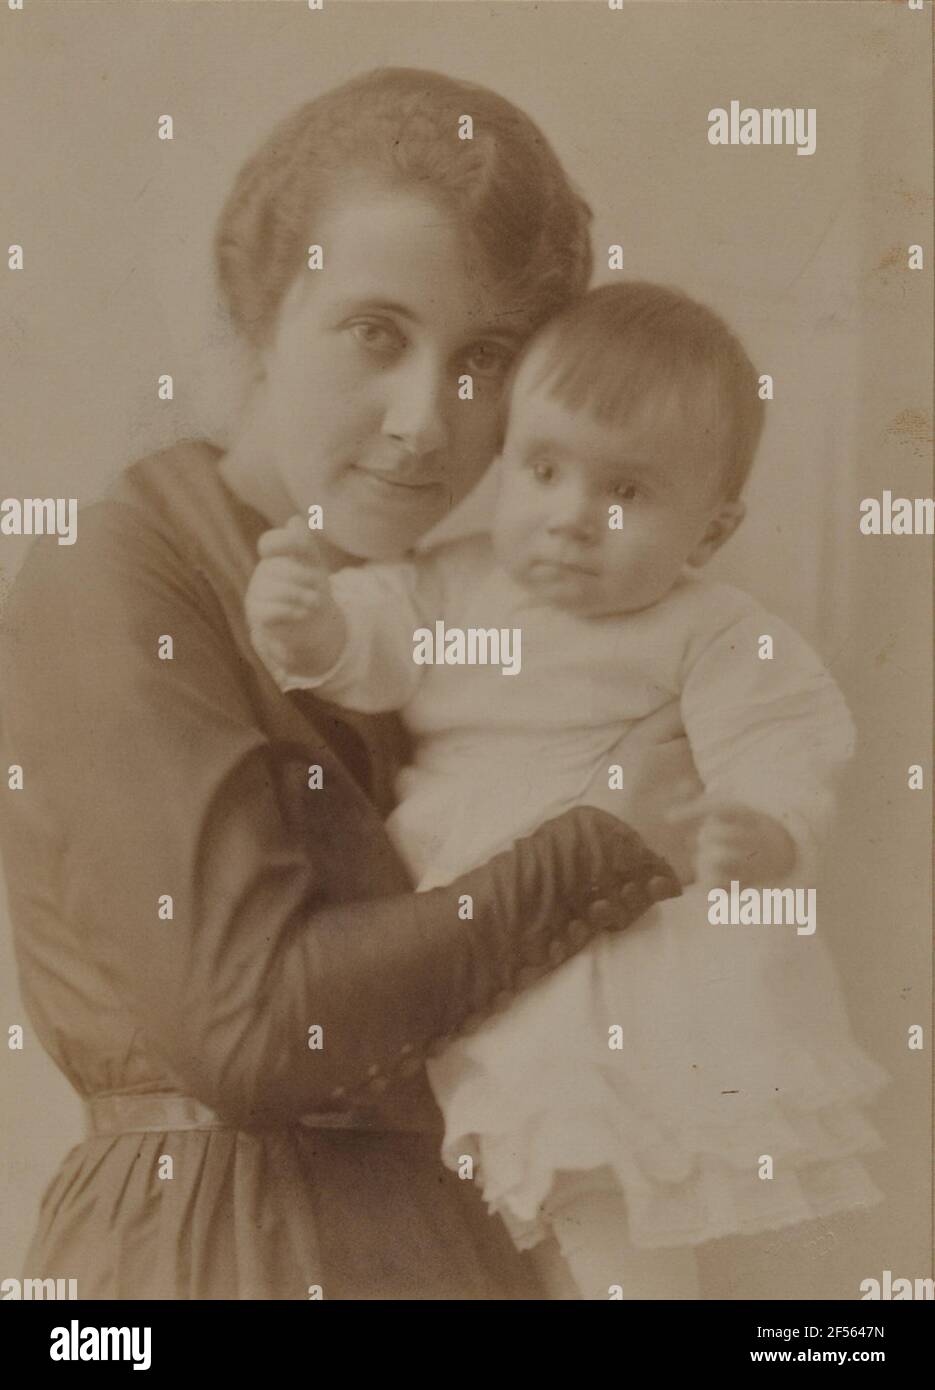 Carla Erna Wilhelmine Scholz with her daughter Renate Scholz. Renate Scholz (1919-1999) poses as the only child of Carla Scholz (Geb. Hartmann) and Dr. med. William Scholz, director of Deutsche Werft AG, from her first year of life to regularly in front of the camera. Thus, the Studio Diez-Dührkoop documents the young woman's growing up in the 1930s, which will later promote in Romance. The photographer Minya Diez-Dühnkoop (1873-1929) has begun as a 15-year-old in the Hamburg studio of her father, Rudolf Dührkoop, to work. From 1906 she is officially business partner of her father and finally Stock Photo